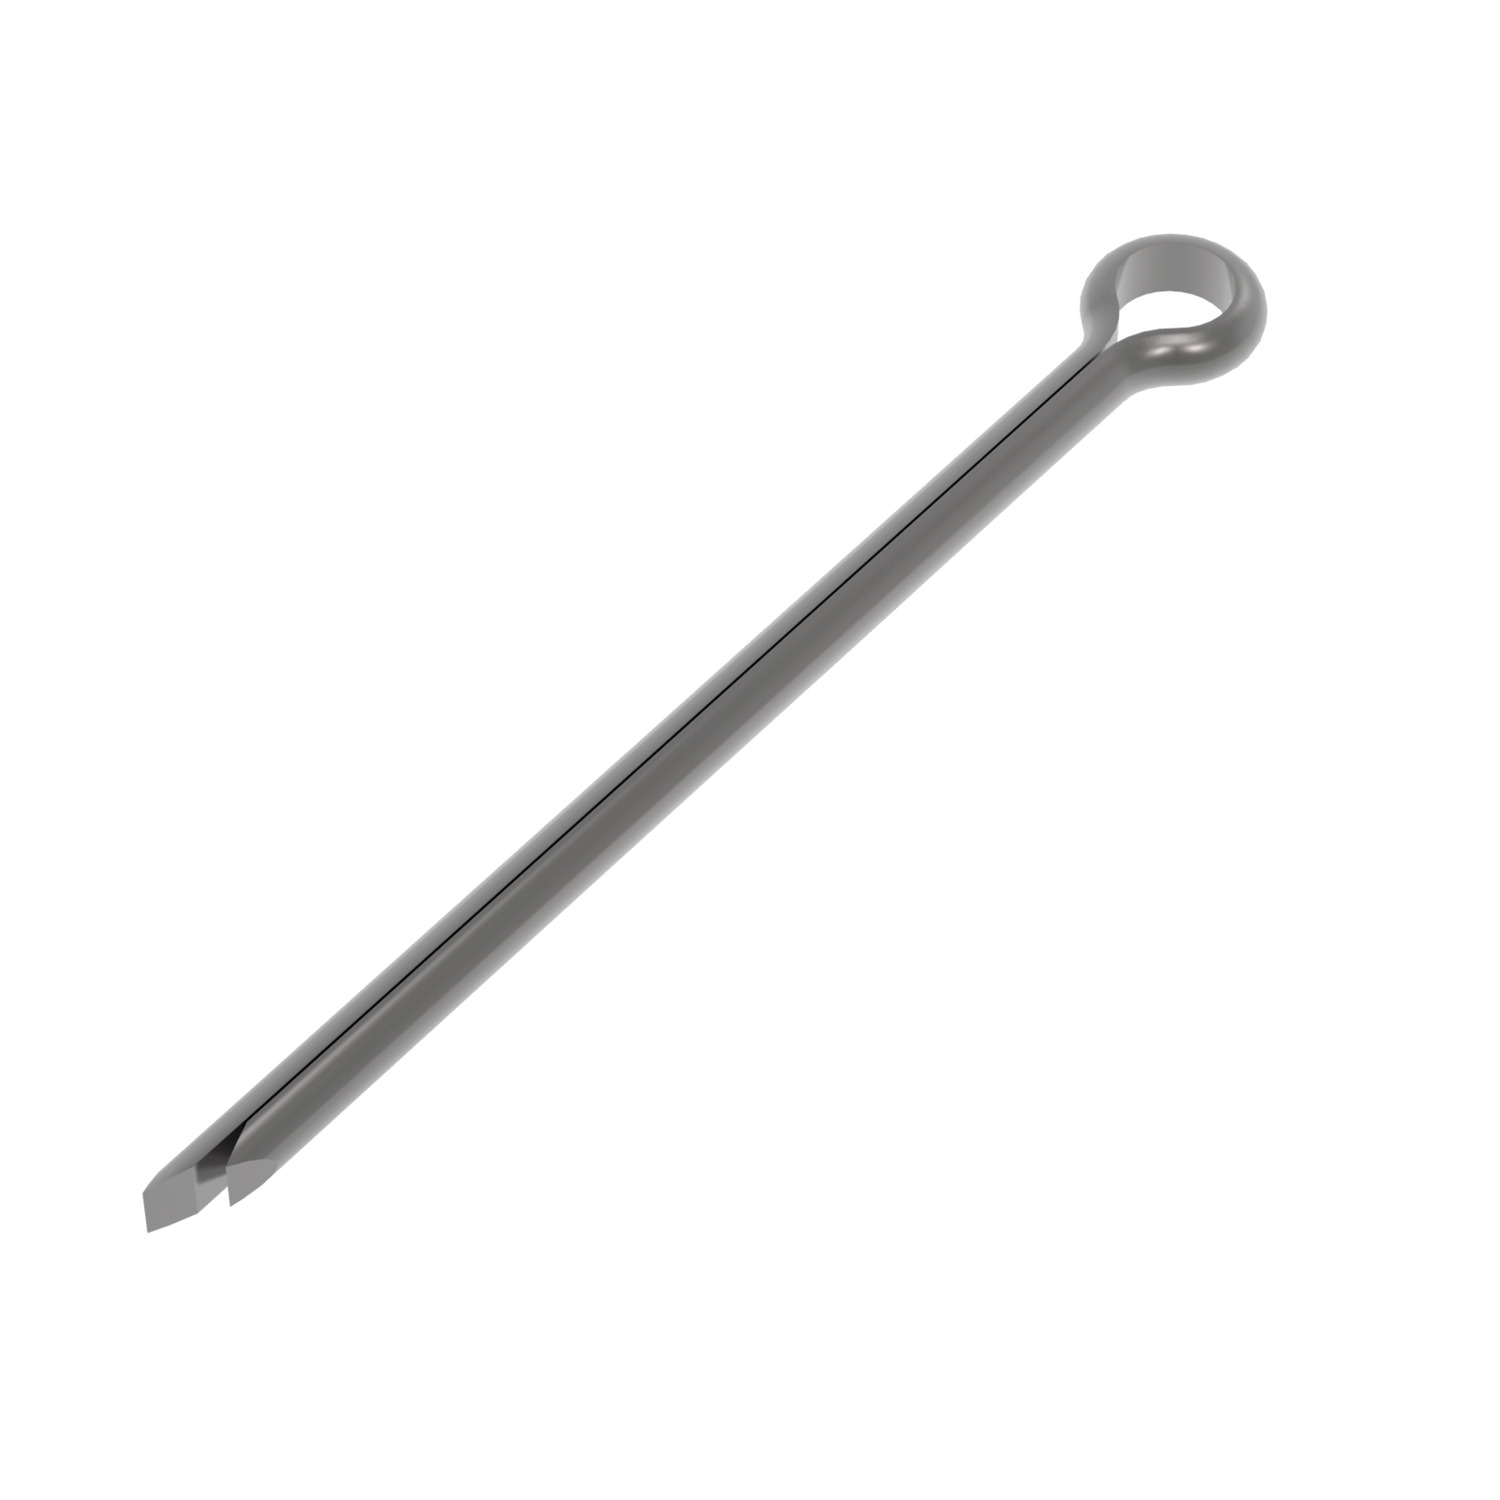 65674.W0050 Steel Cotter Pin - Zinc plated mild St. 5,0 - 50 - 4,4 - 4,6